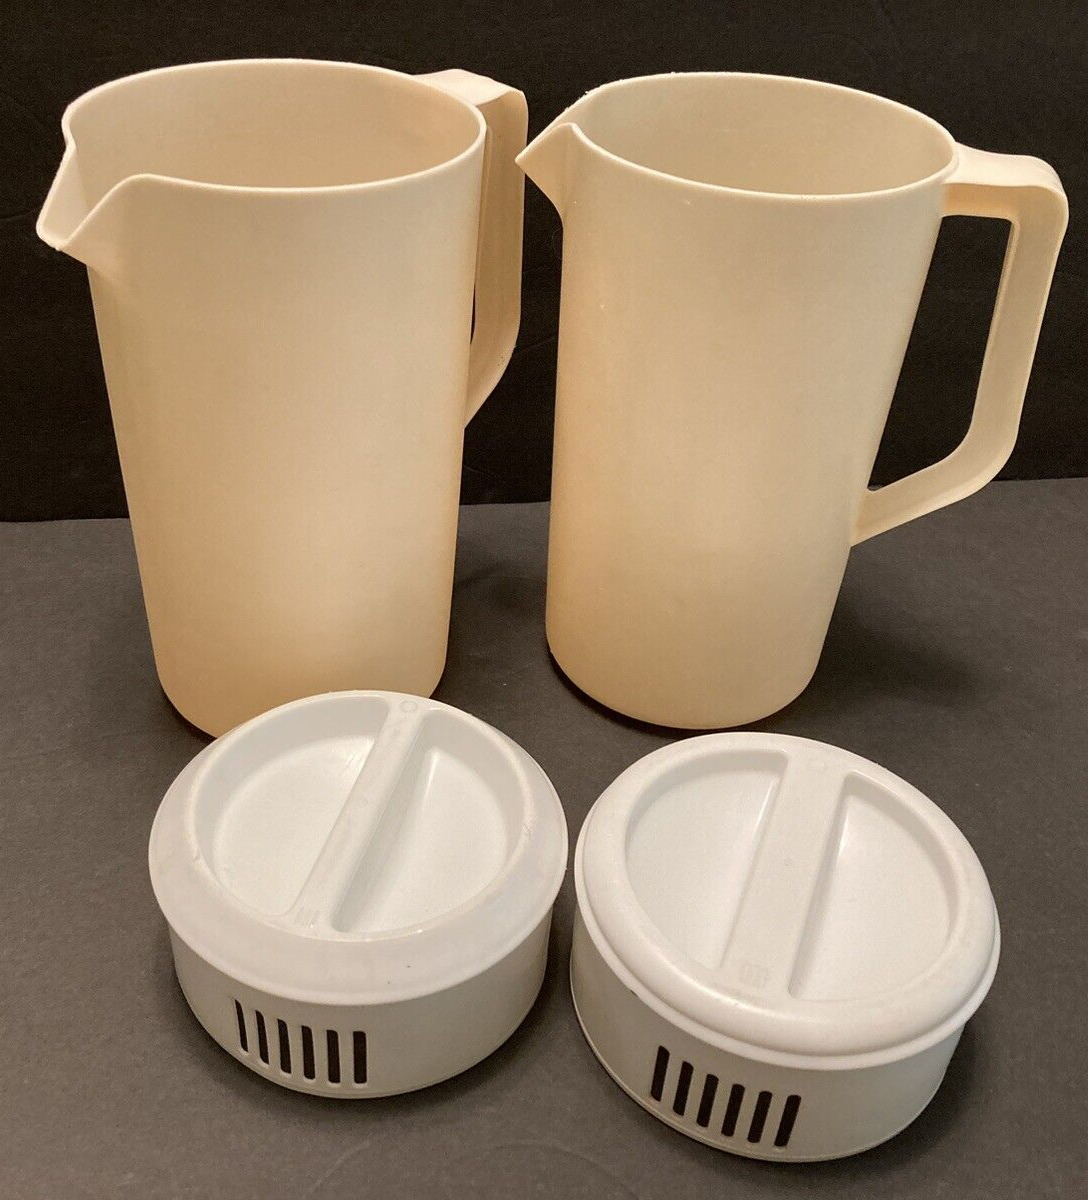 Rubbermaid (Two) - 2 1/4 Quart Ivory Pitchers Strainers w/ Lid #2129 - VINTAGE